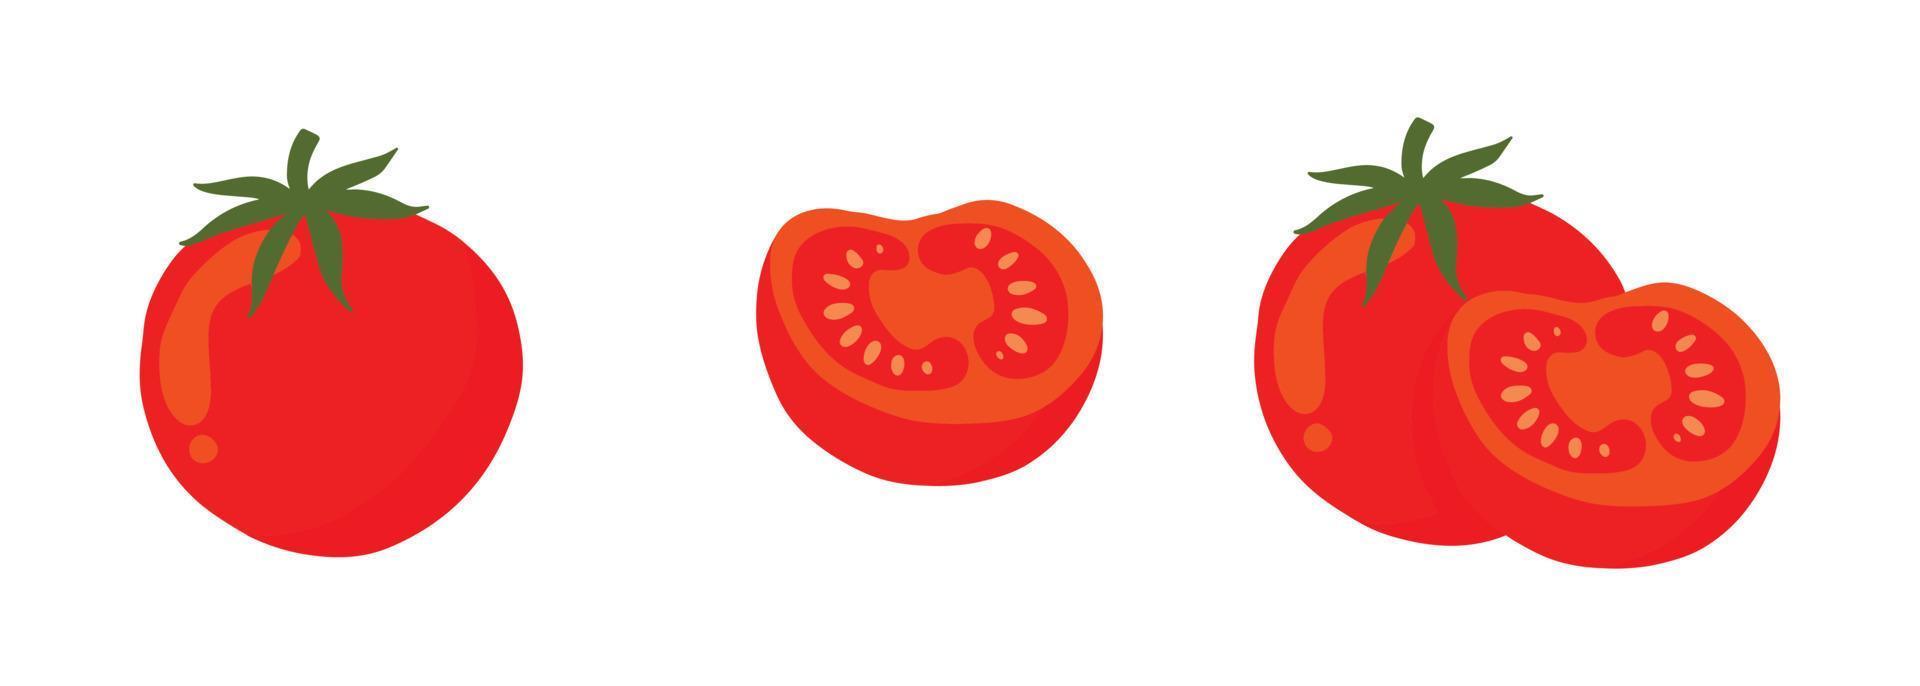 set of tomato illustration in group, slice and single vector